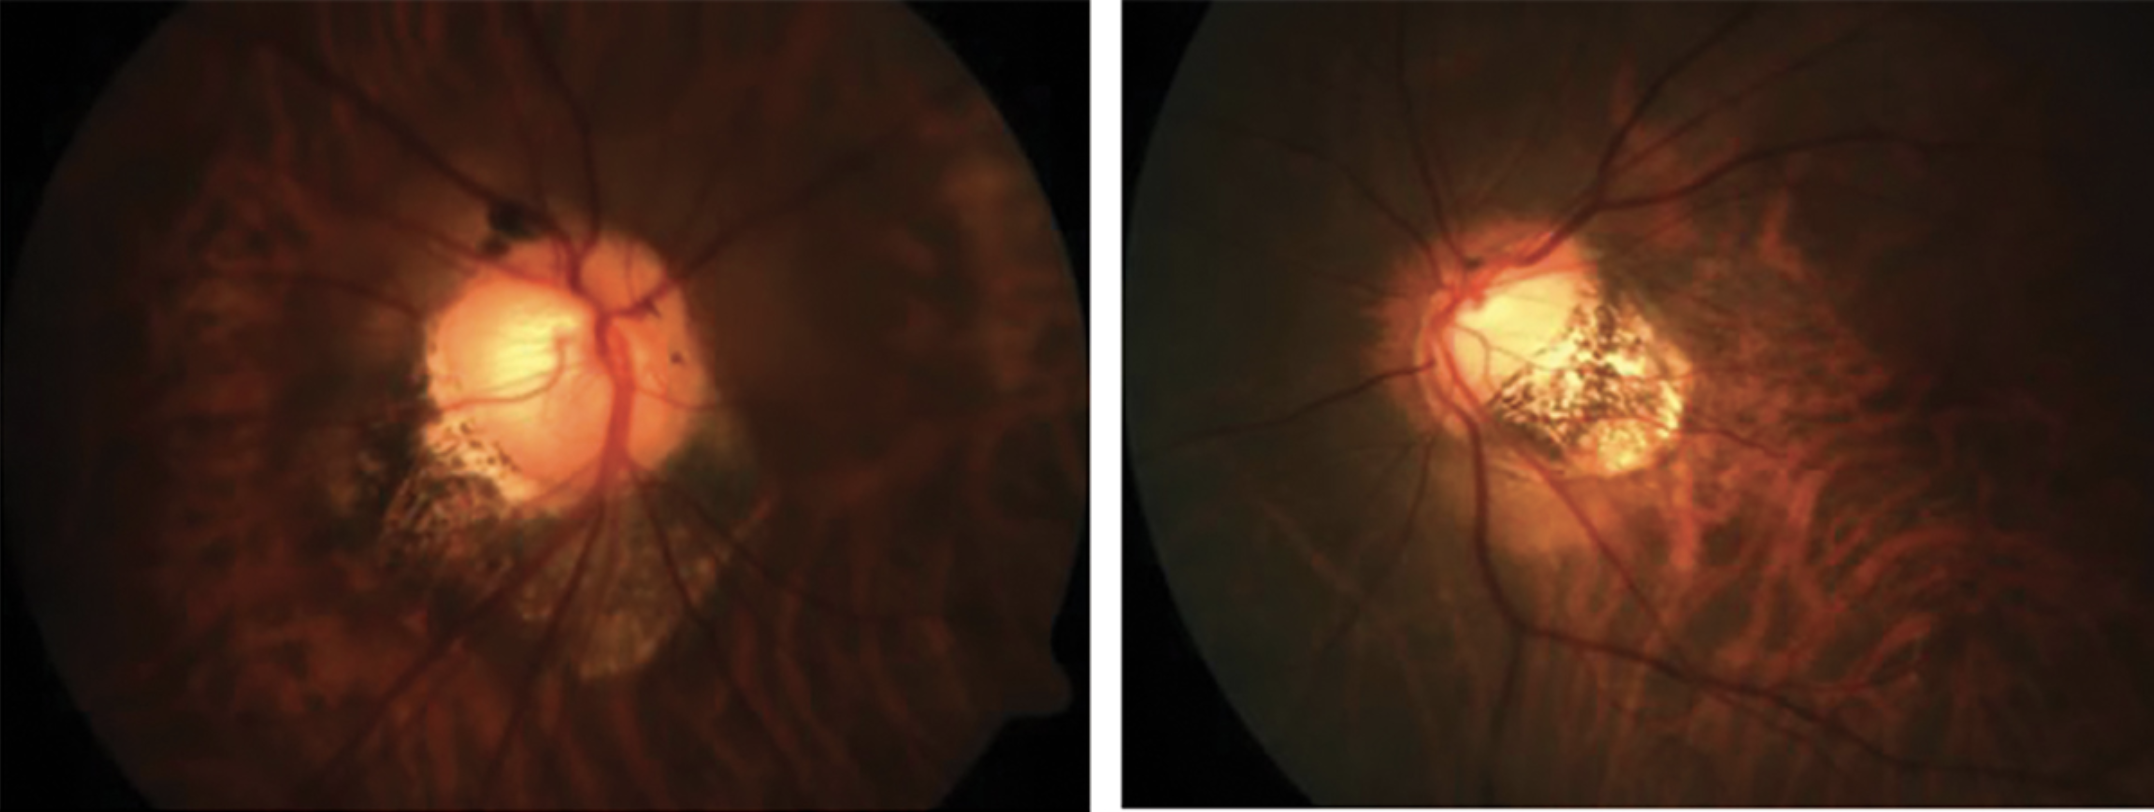 Posterior staphyloma determines higher degrees of myopic maculopathy with worse visual acuity. Axial length and age are the main risk factors for posterior staphyloma development.